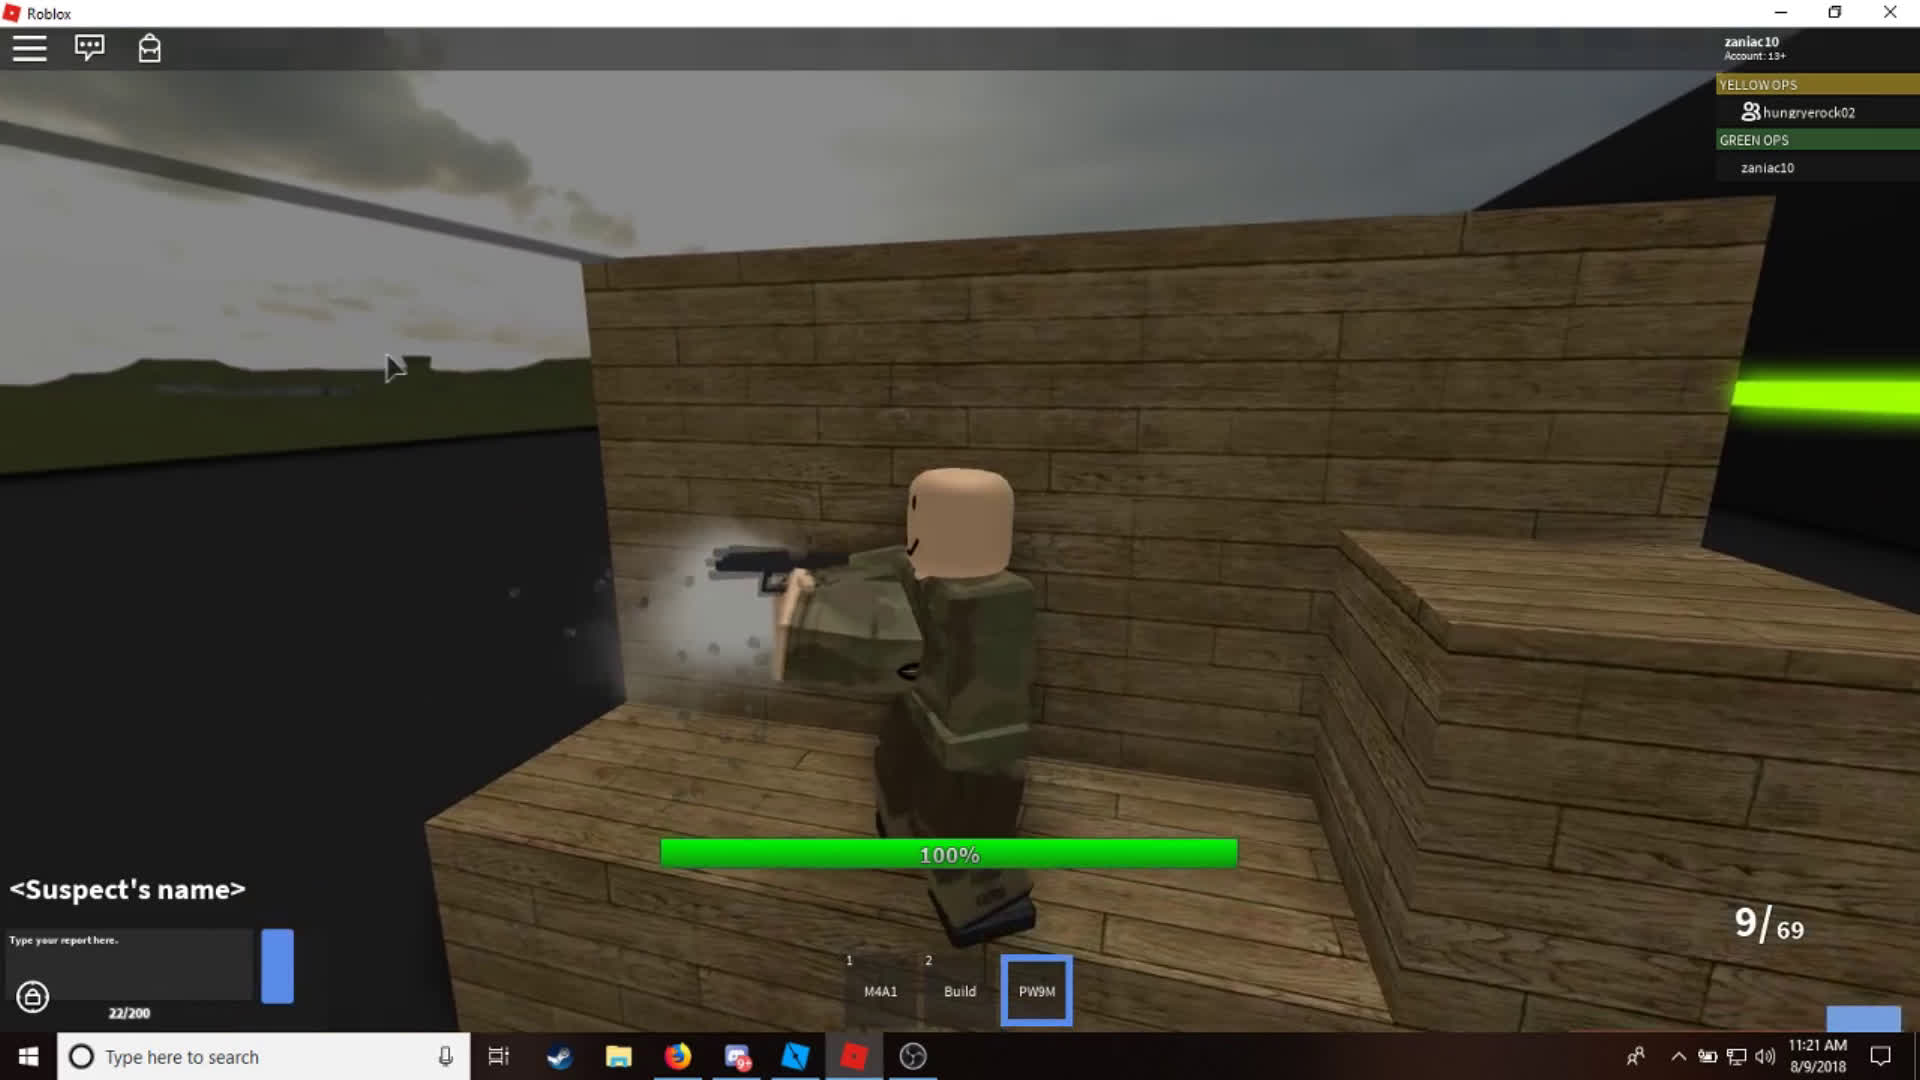 Me And Friends Have Been Making A Game Inspired By The Old Game Warfare It S Called Deltashock And We Ve Been Working On It Since Around 4 Days Ago Here Is Some Of - how to build a roblox game with friends